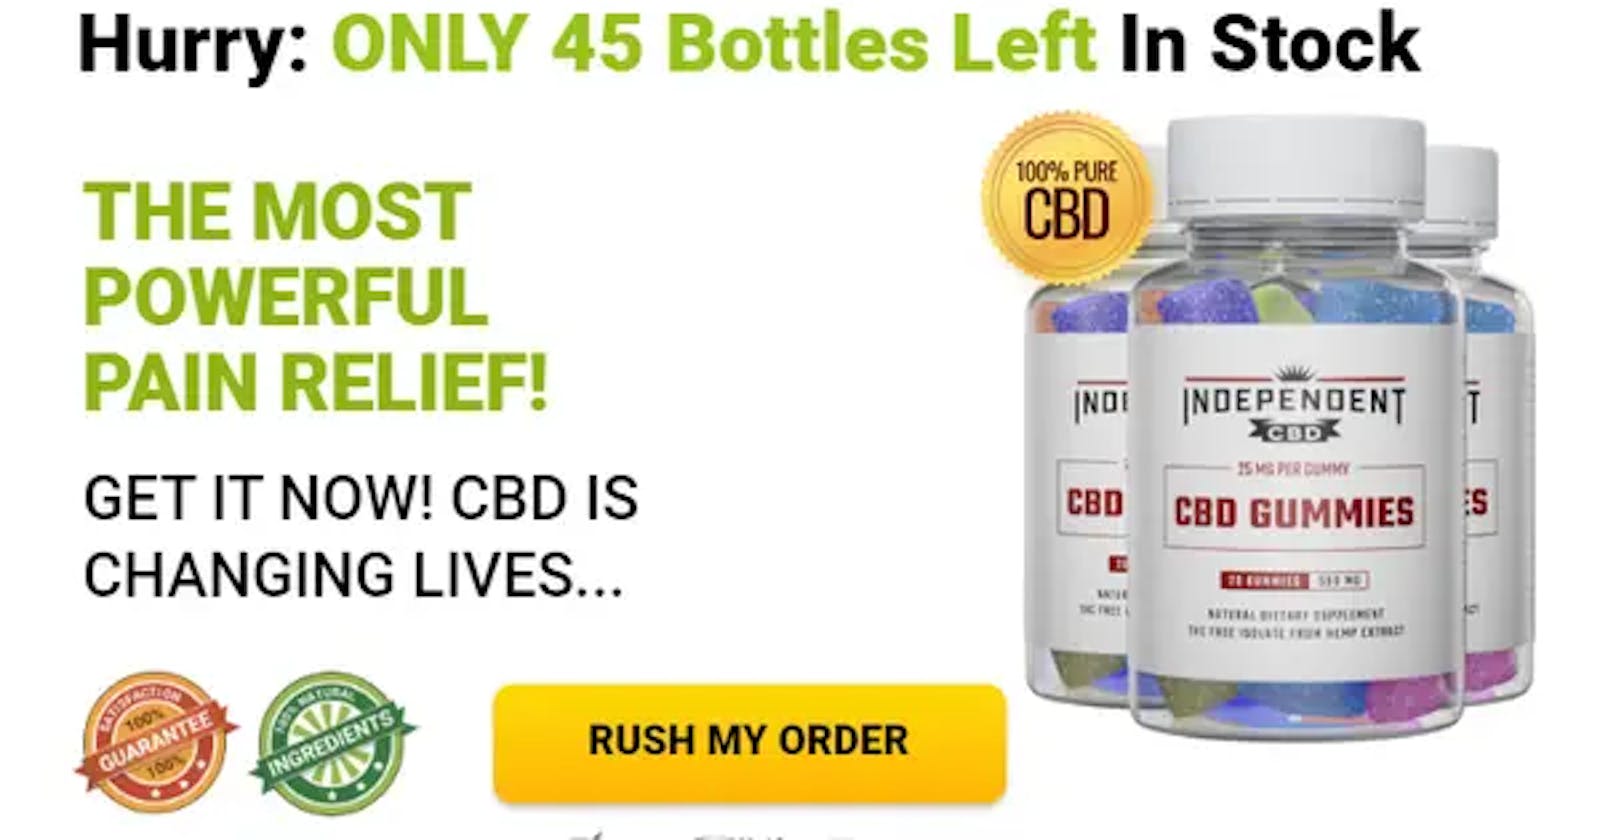 Independent CBD Gummies (Review) Critical Details Exposed!Shocking Scam Review (Scam or Legit) Worth BuyingDo They Work? Scam or Safe? 